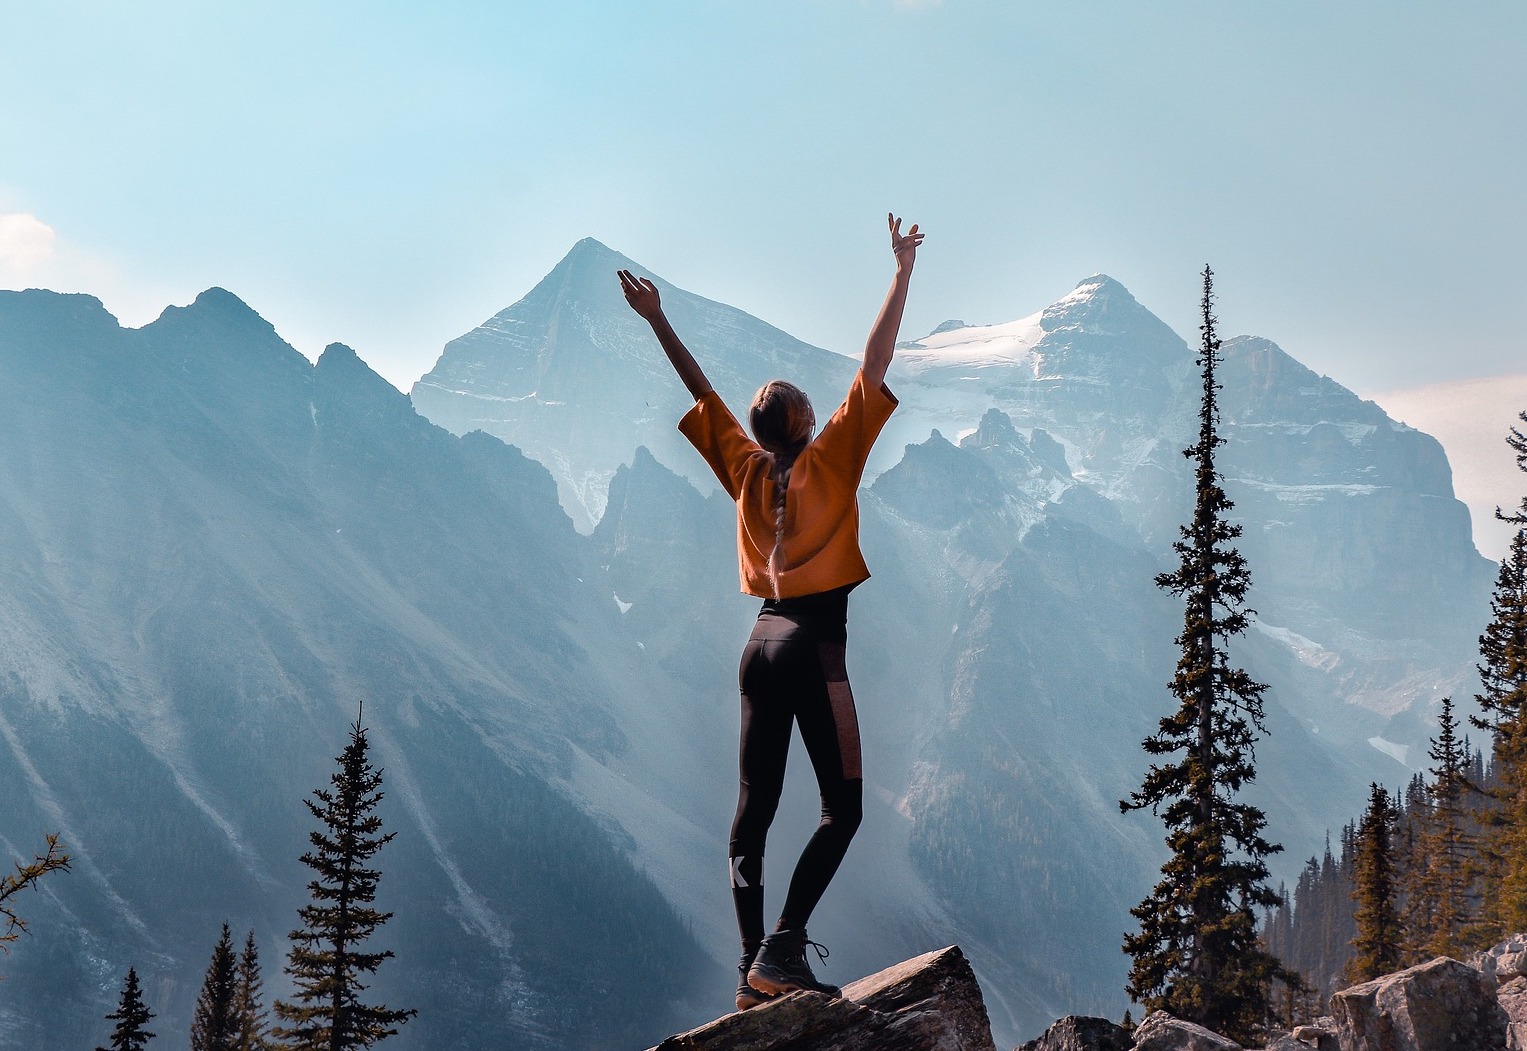 Girl celebrates reaching the highest part of a mountain